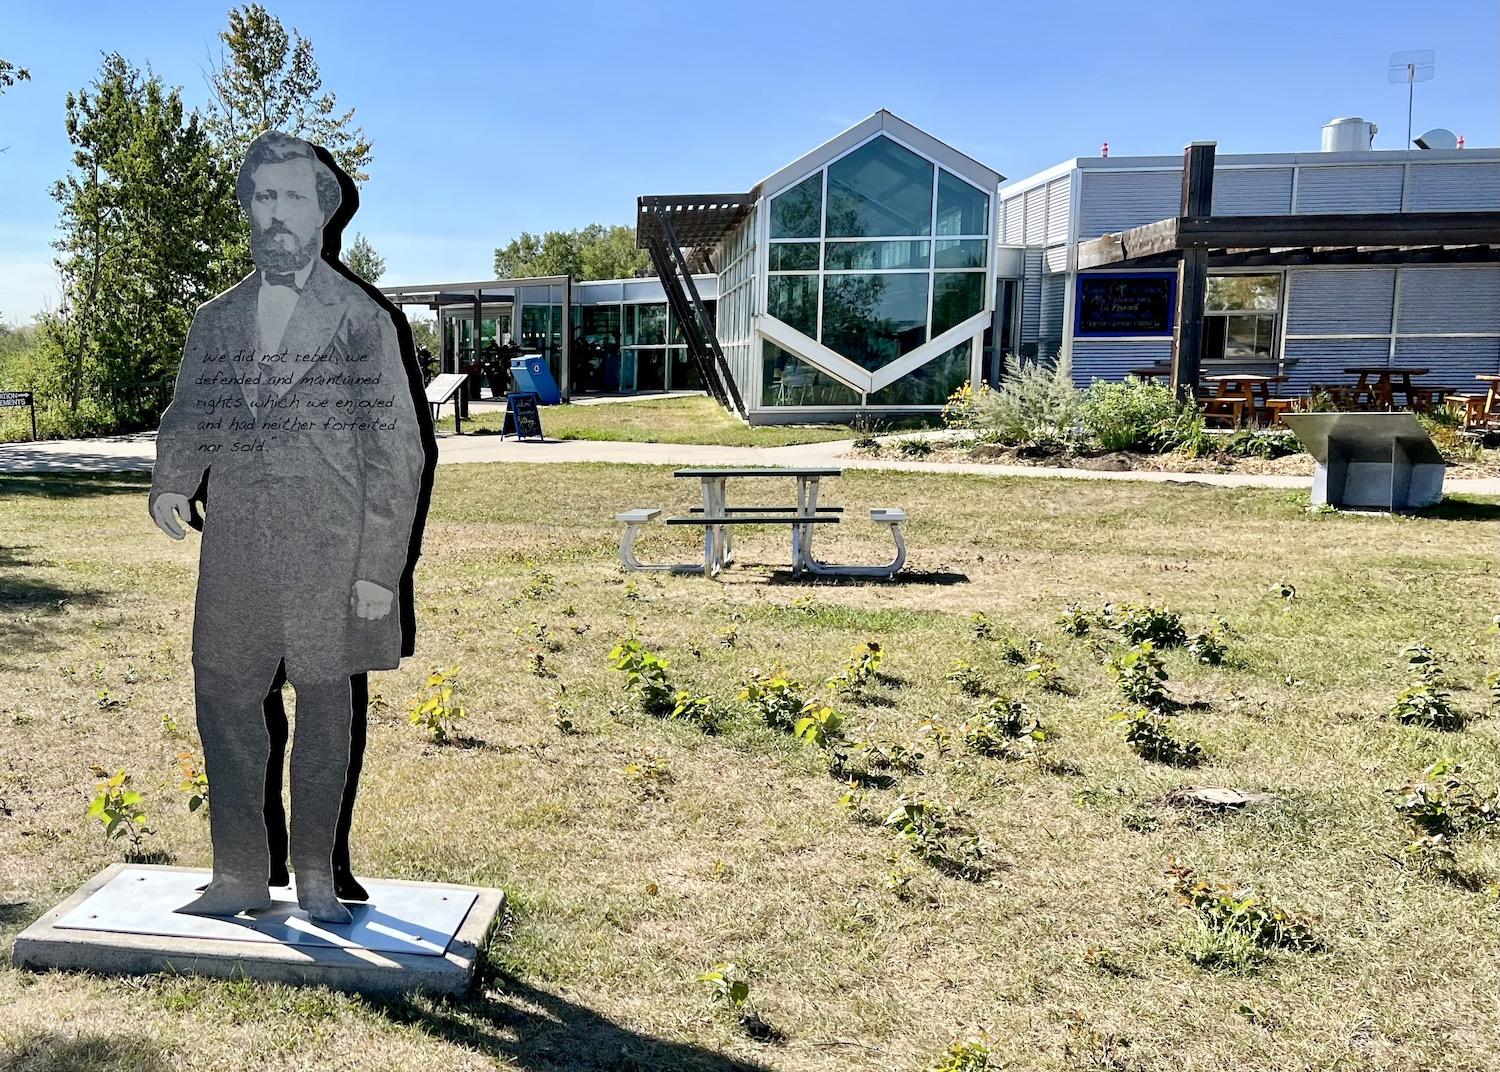 An image of Métis leader Louis Riel, emblazoned with one of his famous quotes, greets visitors to Batoche.